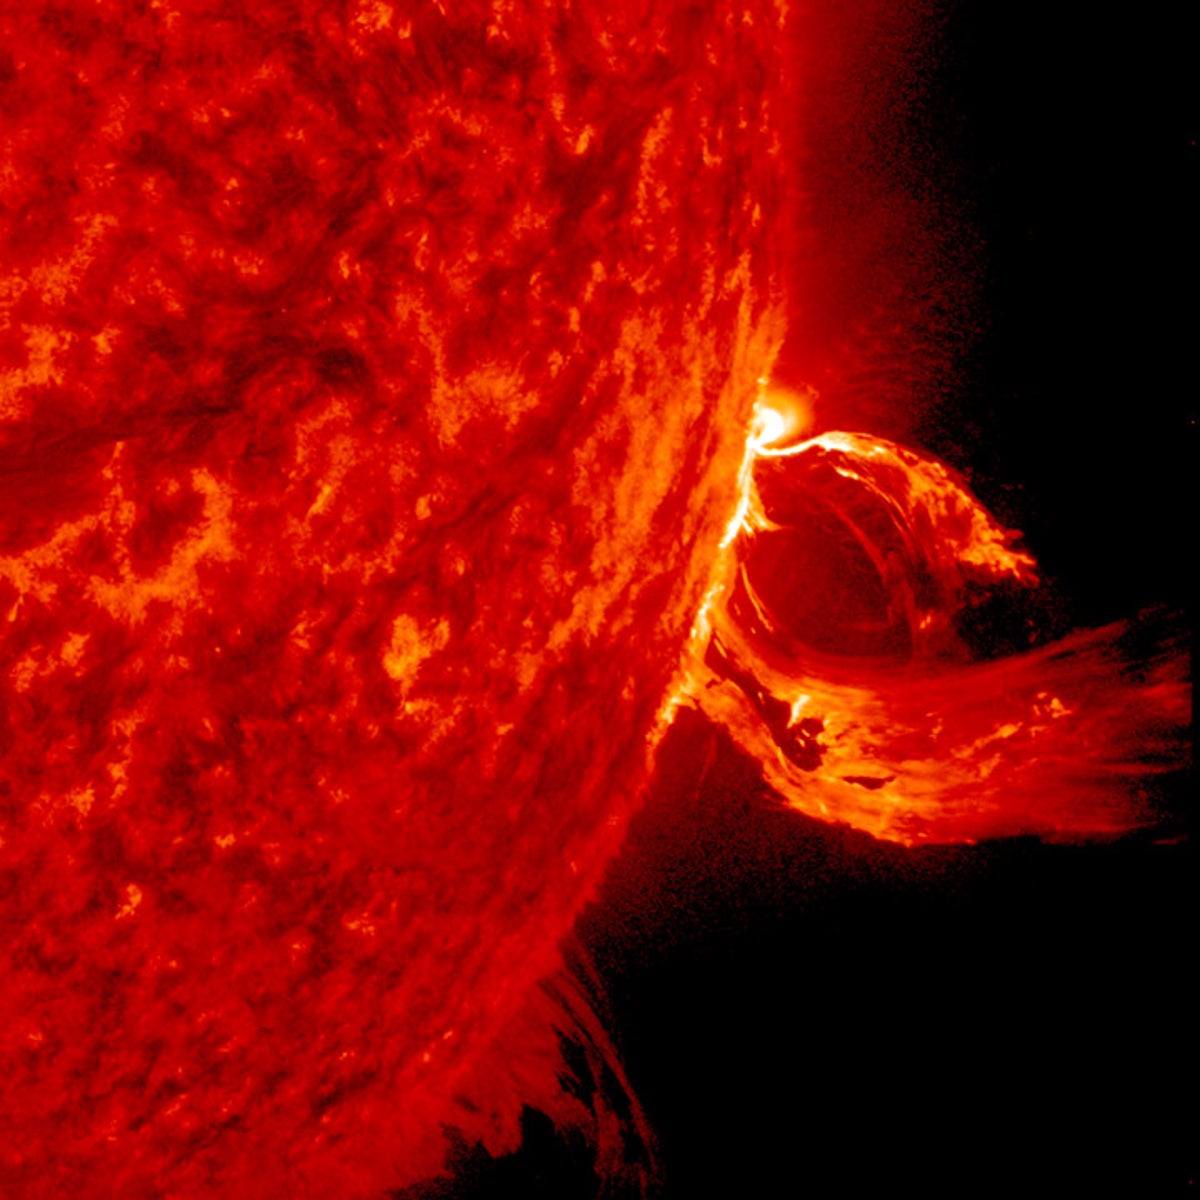 Superflare With Massive, High-velocity Prominence Eruption - SpaceRef